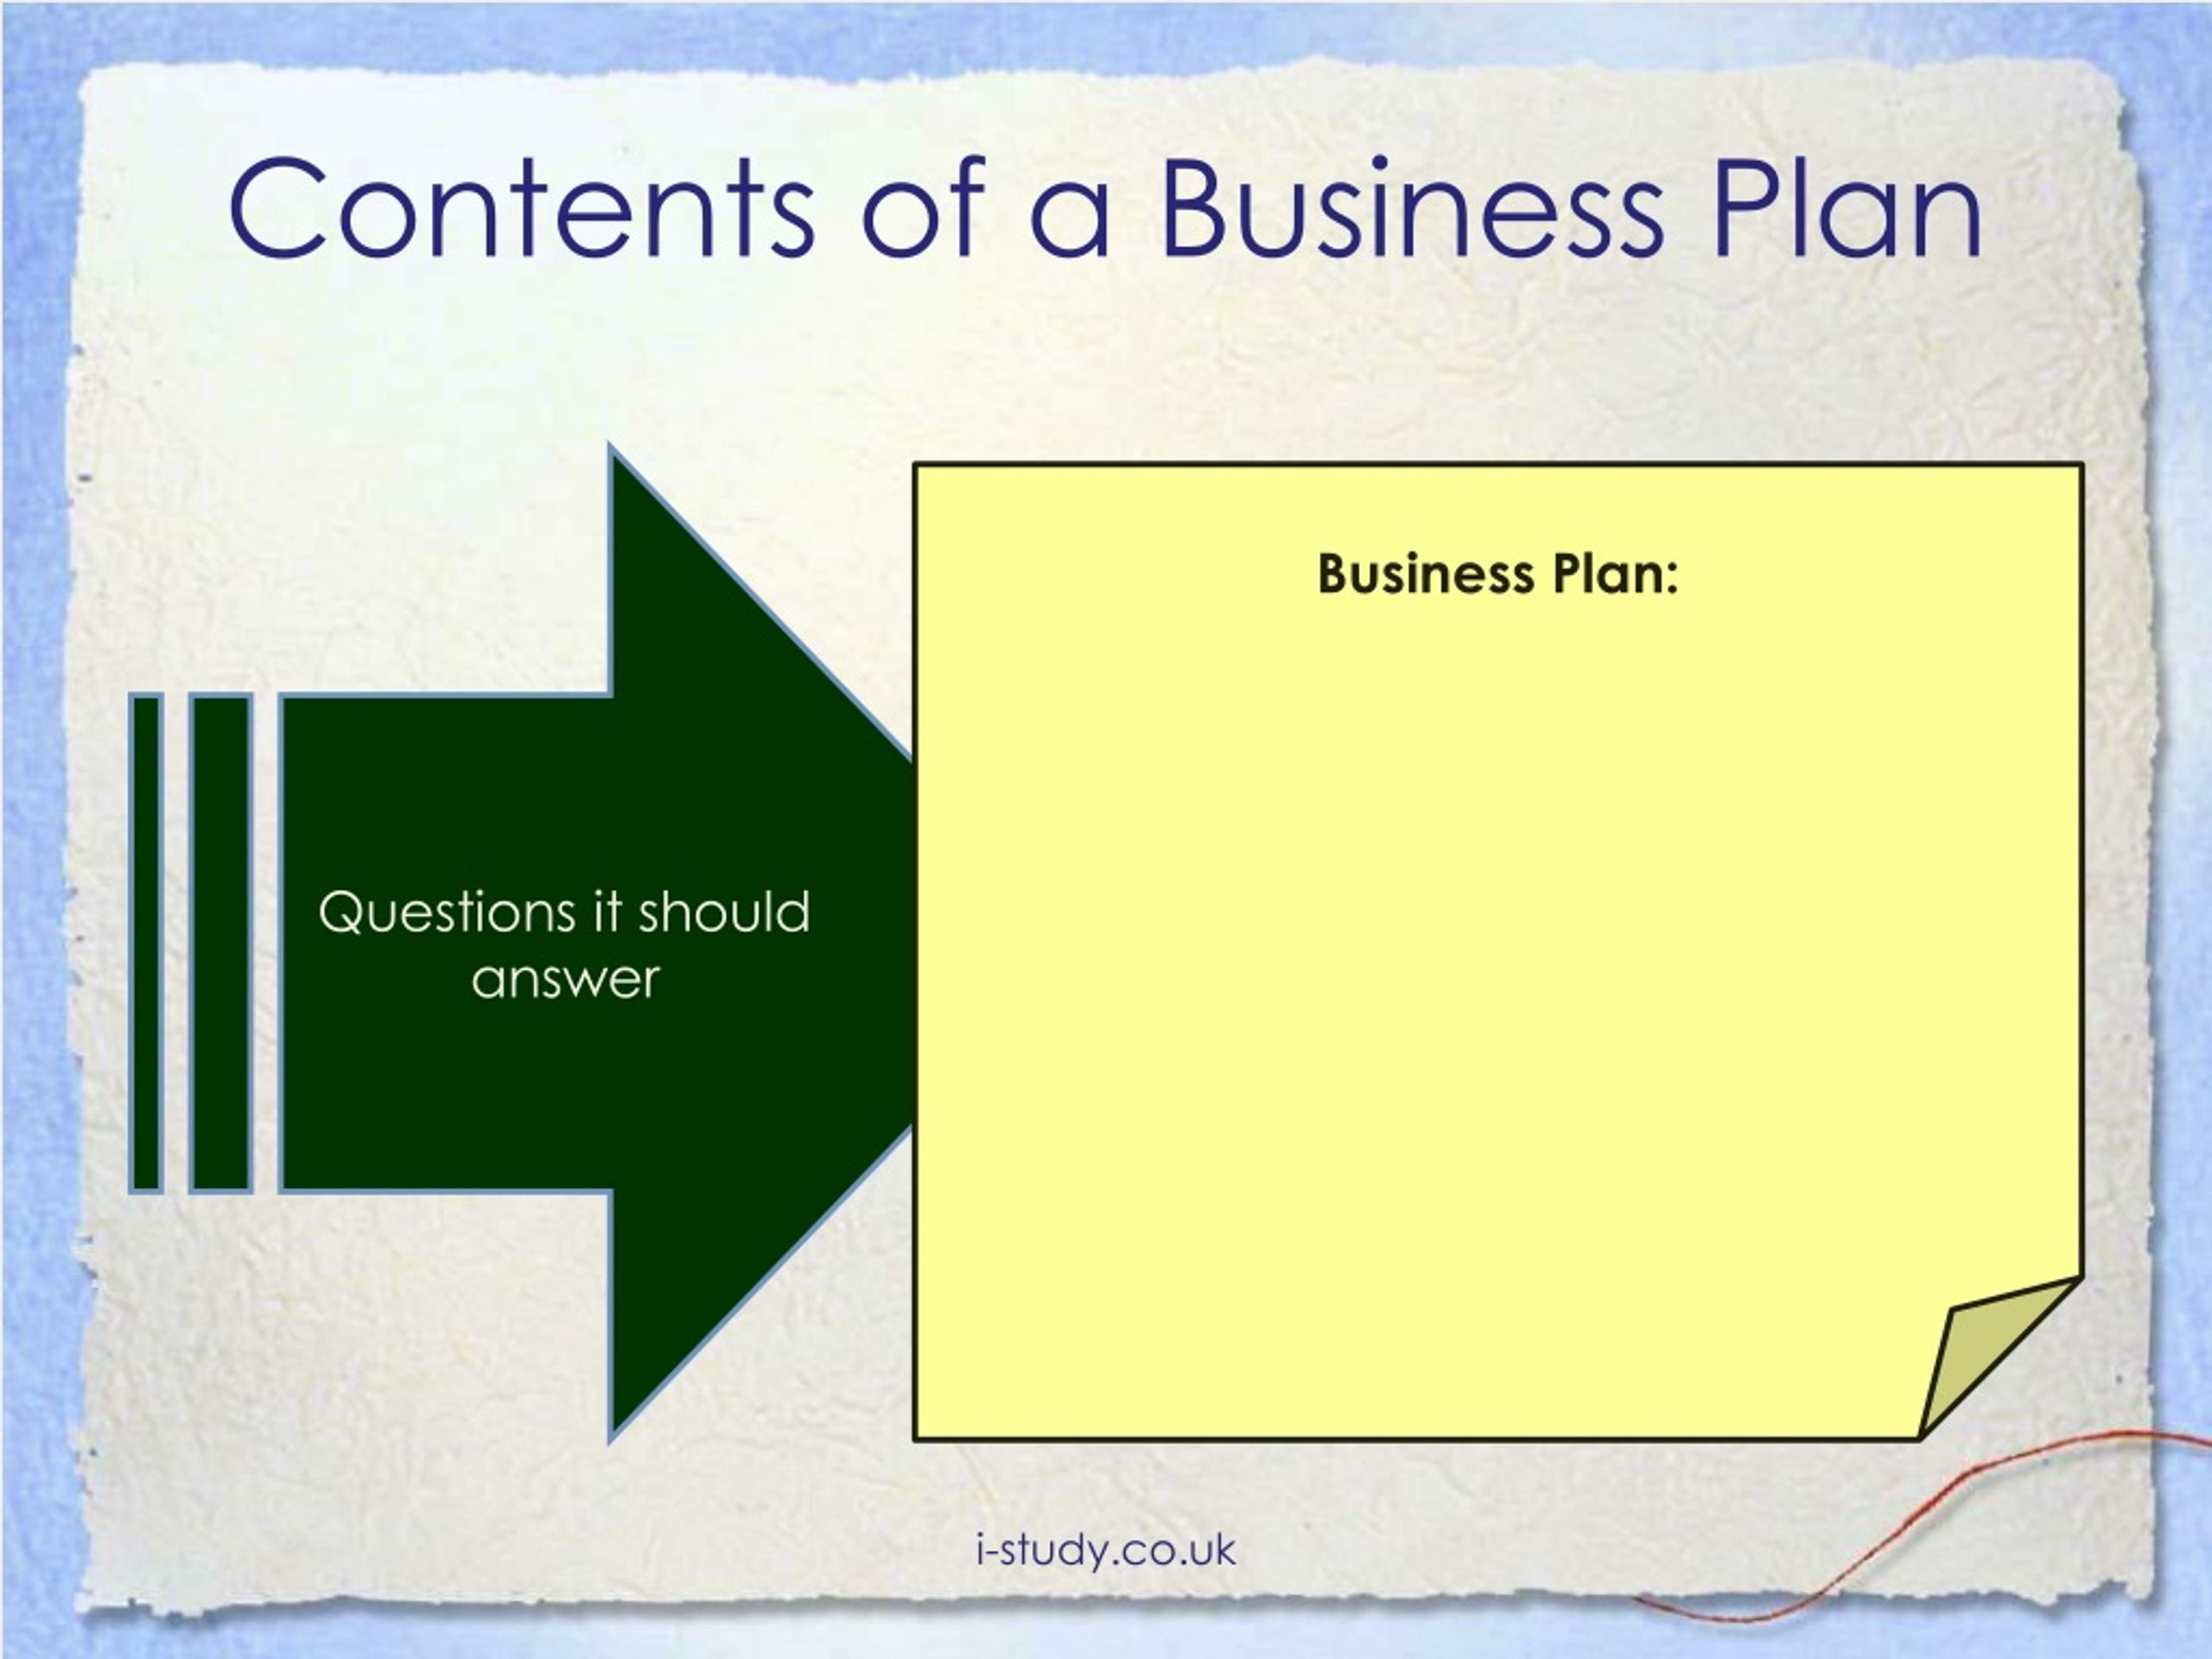 contents of a business plan igcse